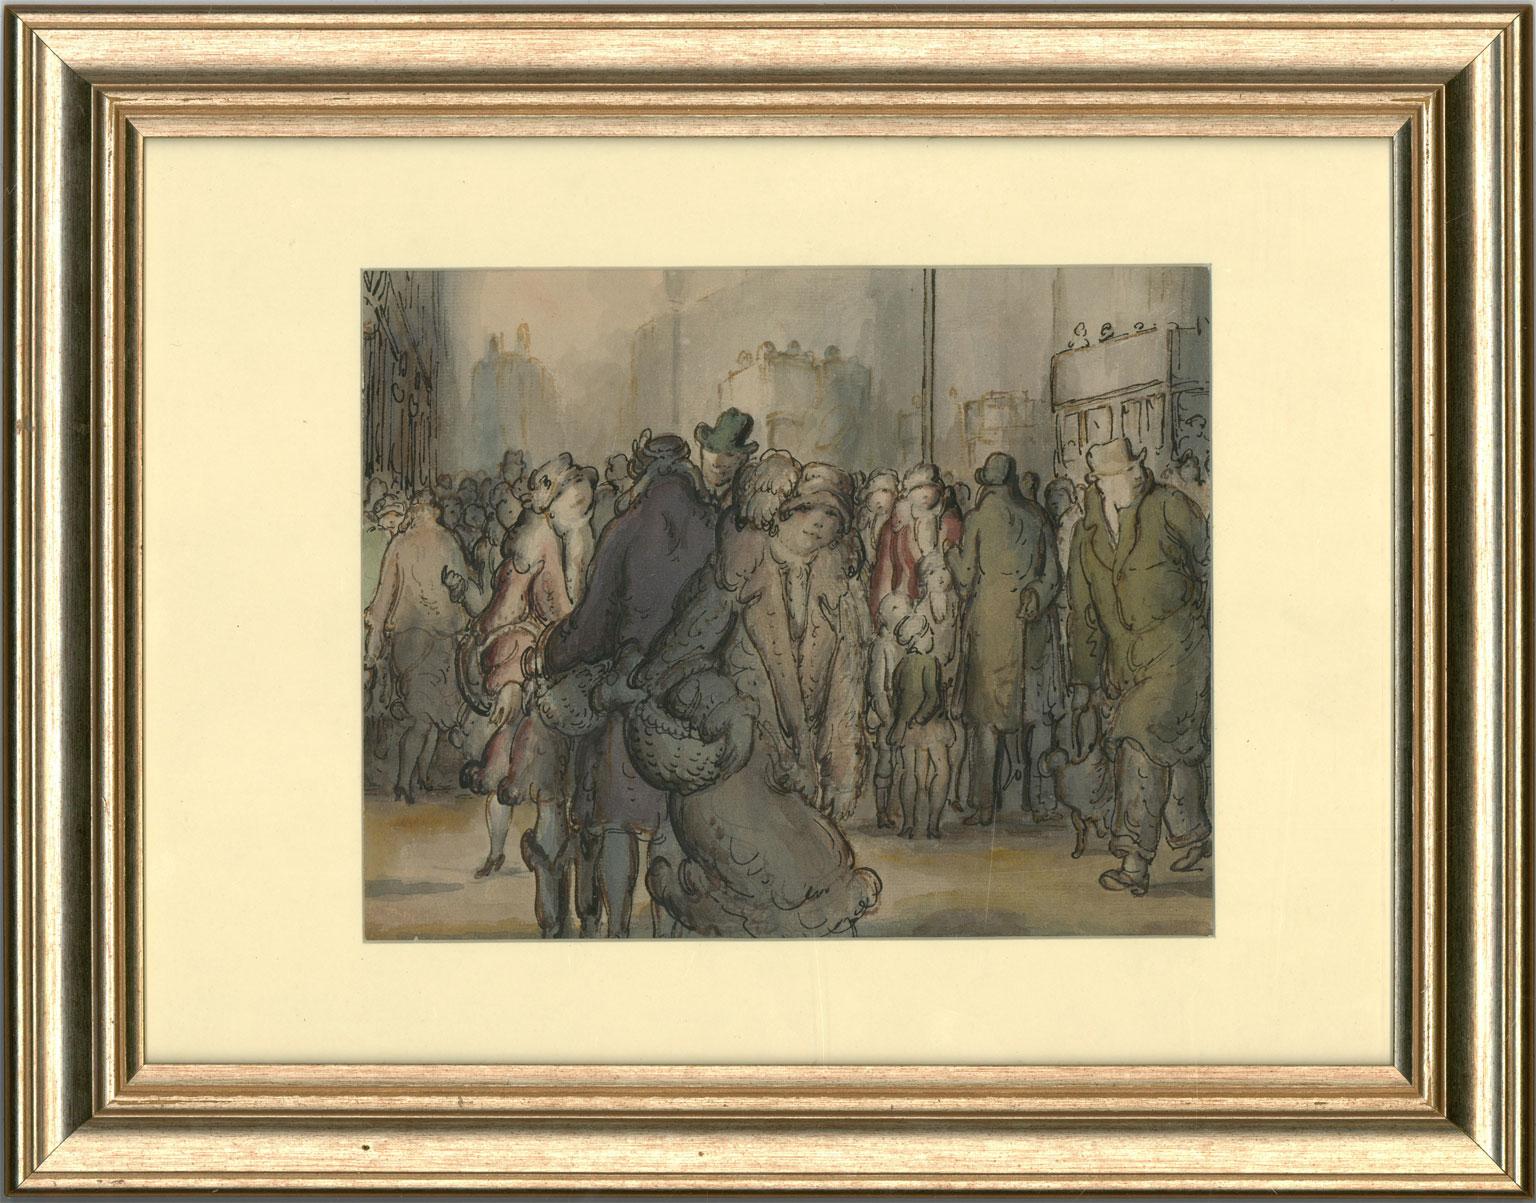 A stunning example of Harold Hope Read's oeuvre, drawn with ink and watercolour wash. Typical of the artist's subject matter, we are presented with a narrative composition of figures on a street going about their everyday lives, many dressed in the